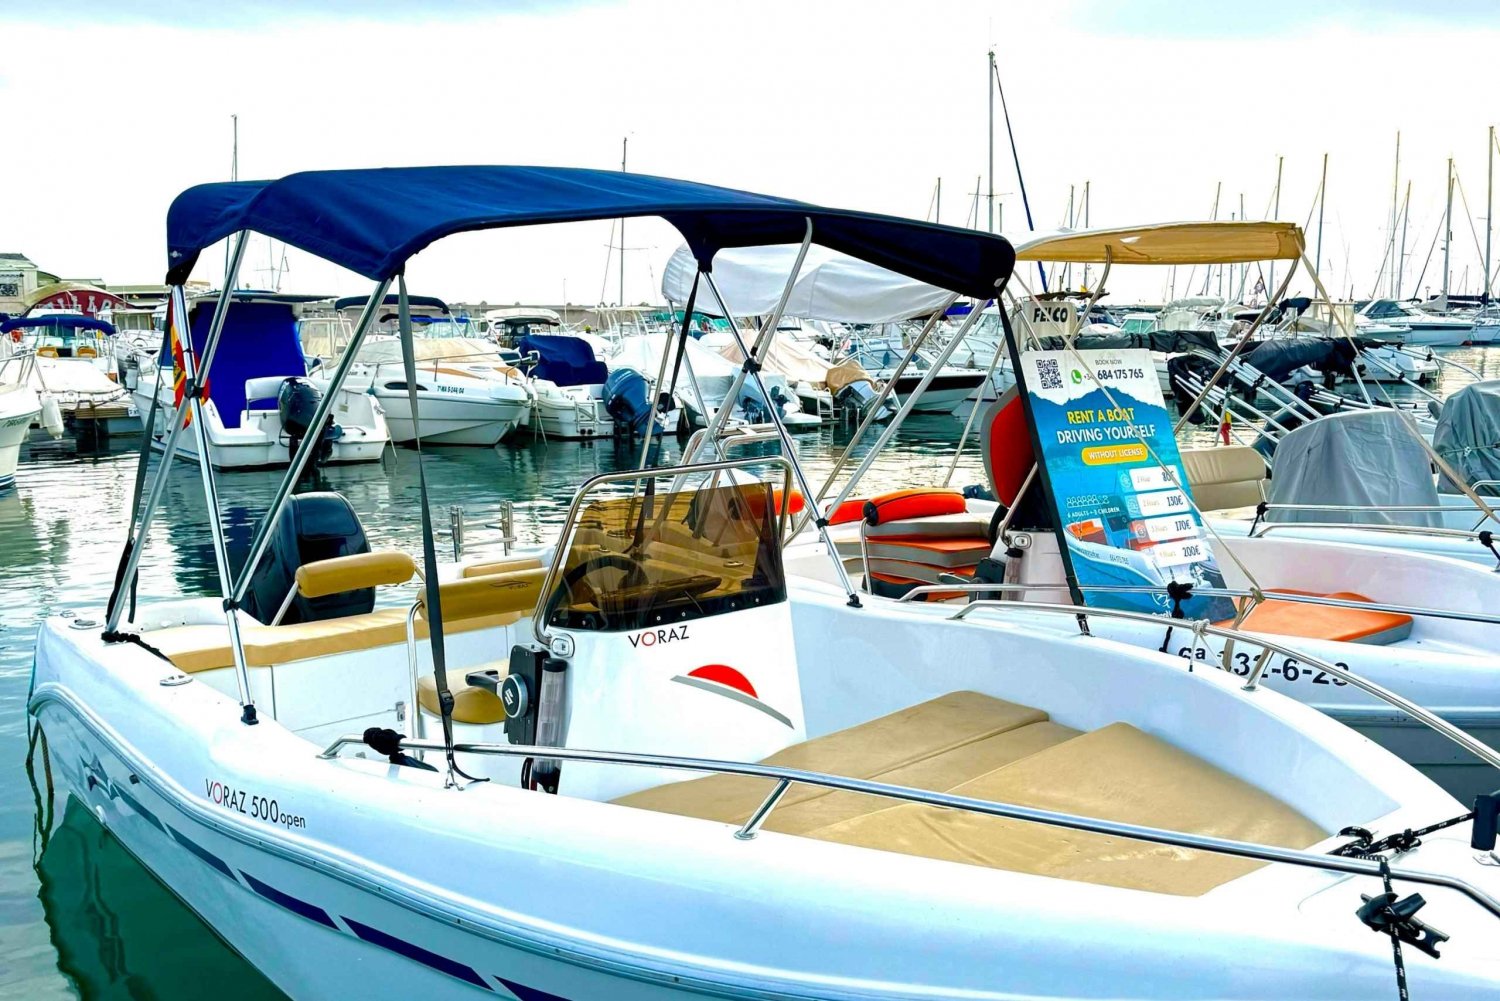 Marbella: Self-Drive Boat Rental with Dolphin Sighting